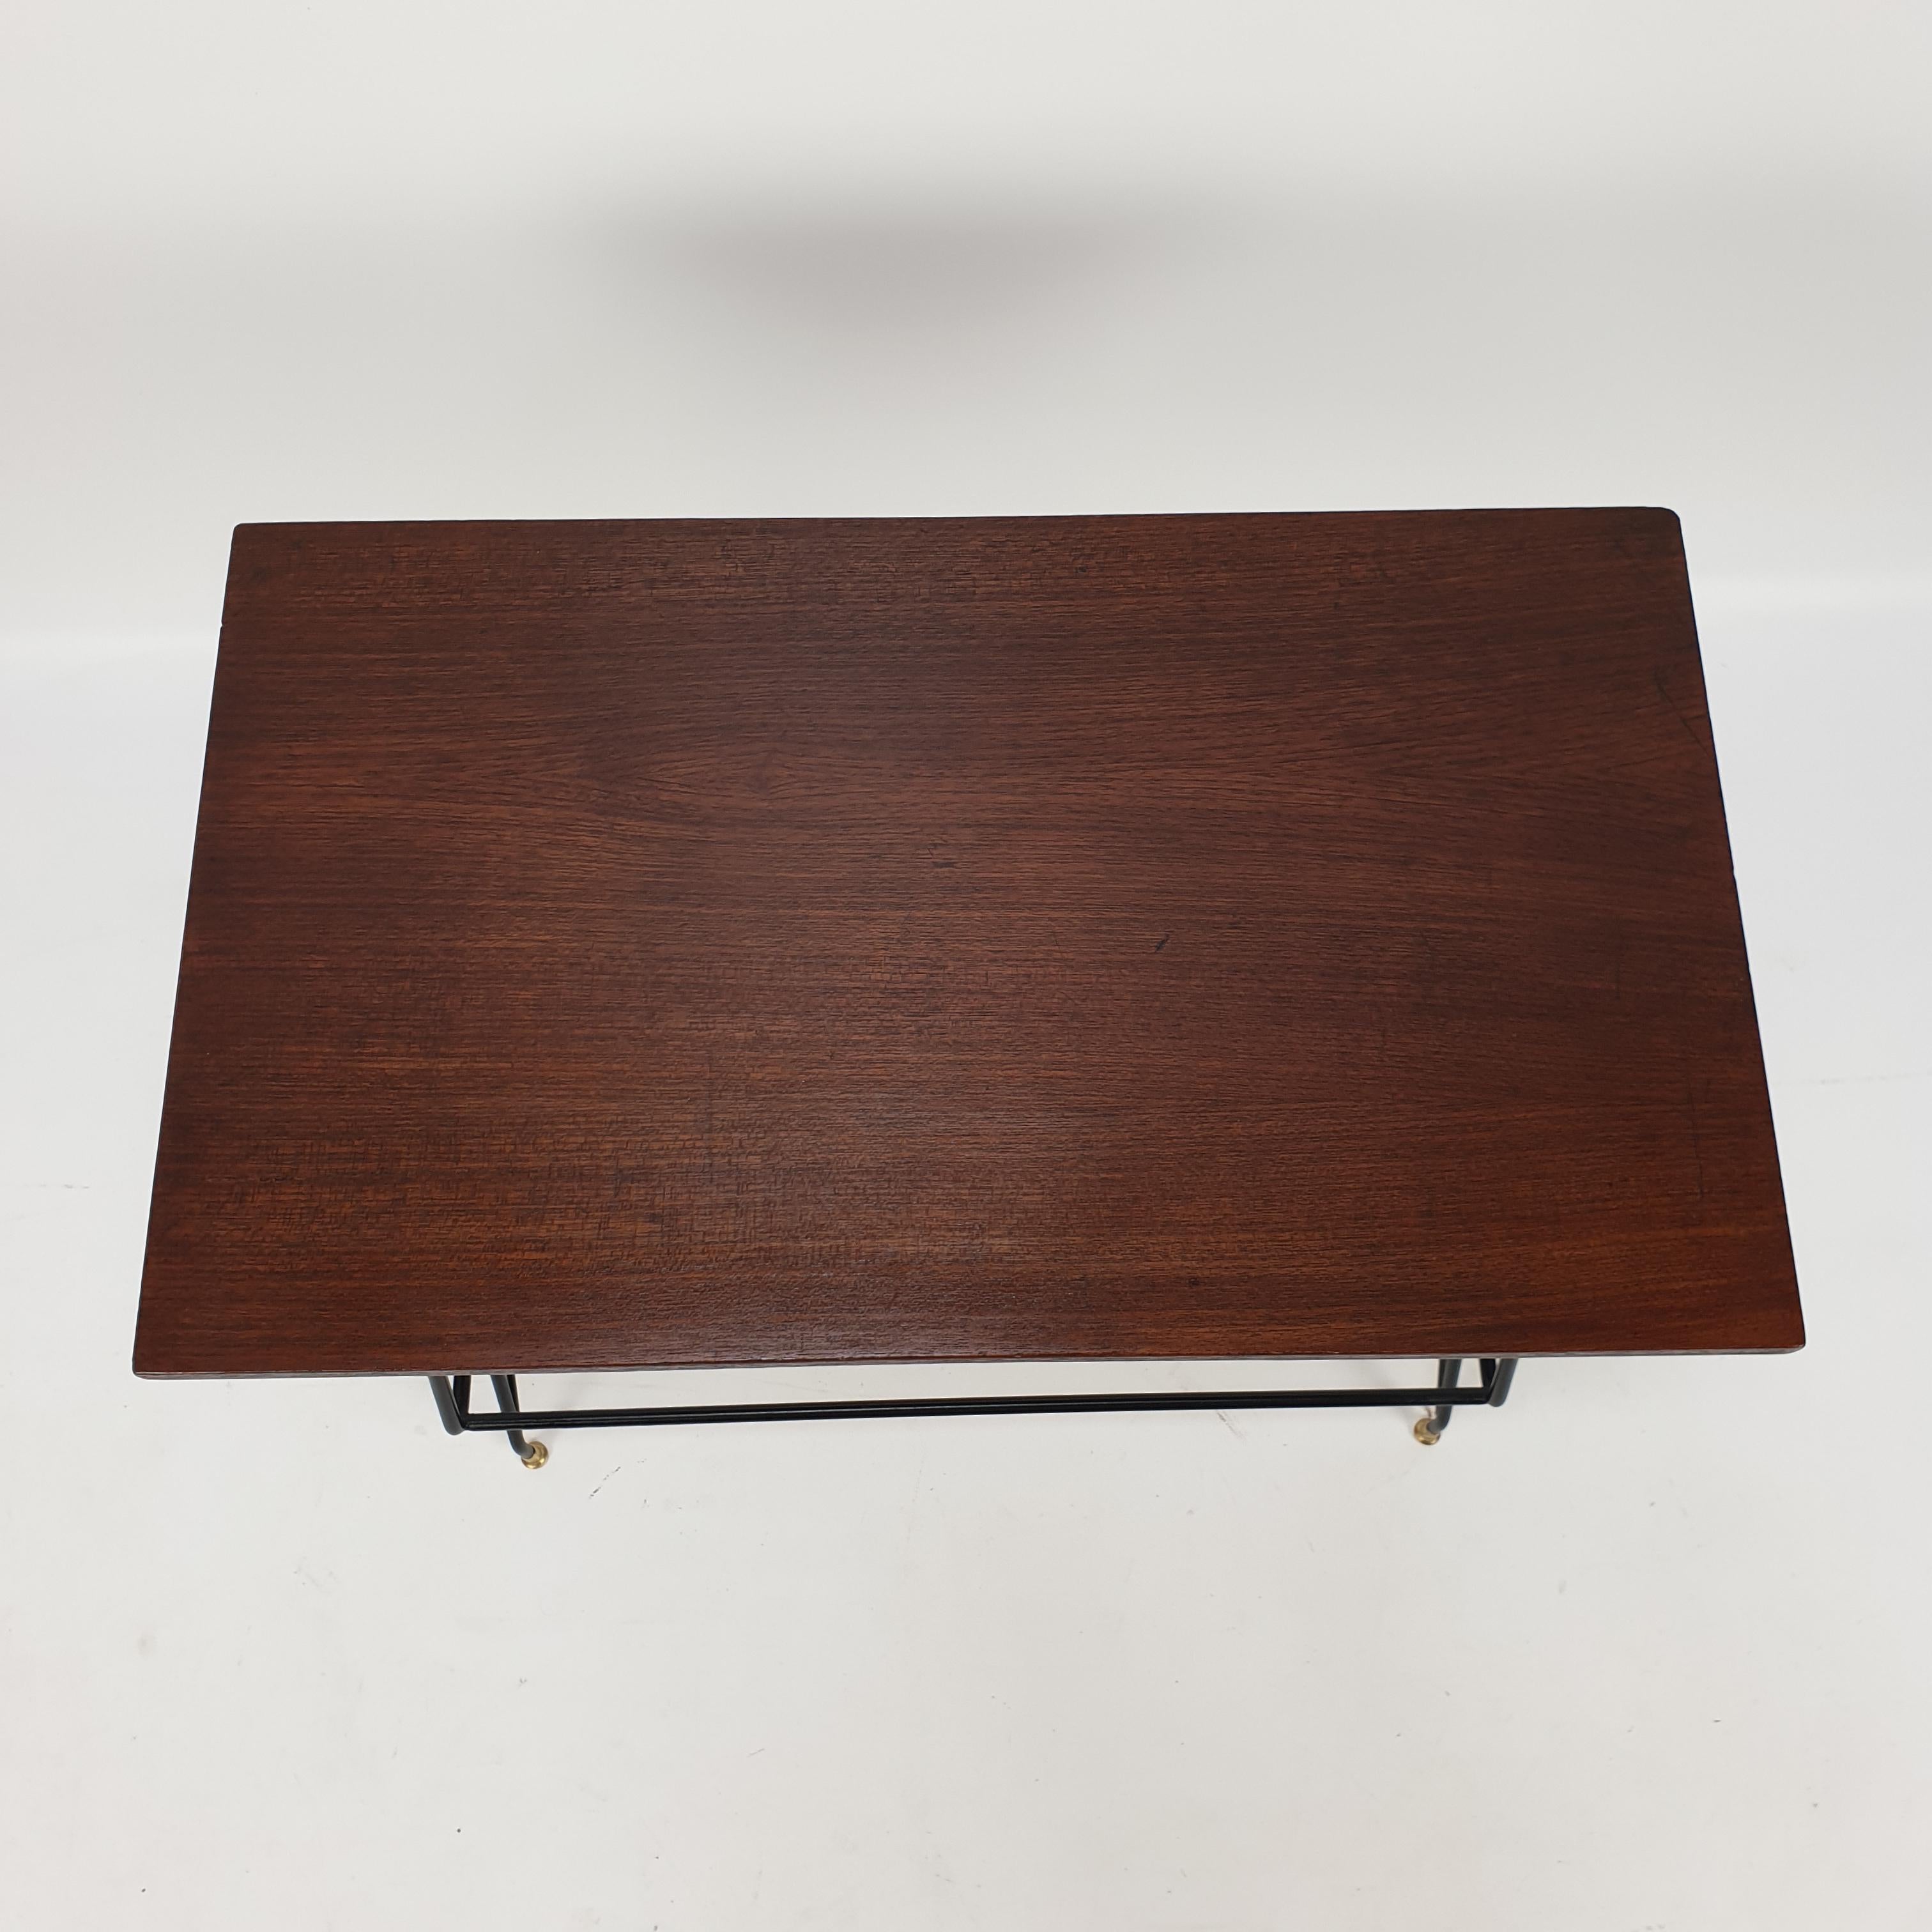 Italian Coffee Table from Mobili Pizzetti, 1950s For Sale 2